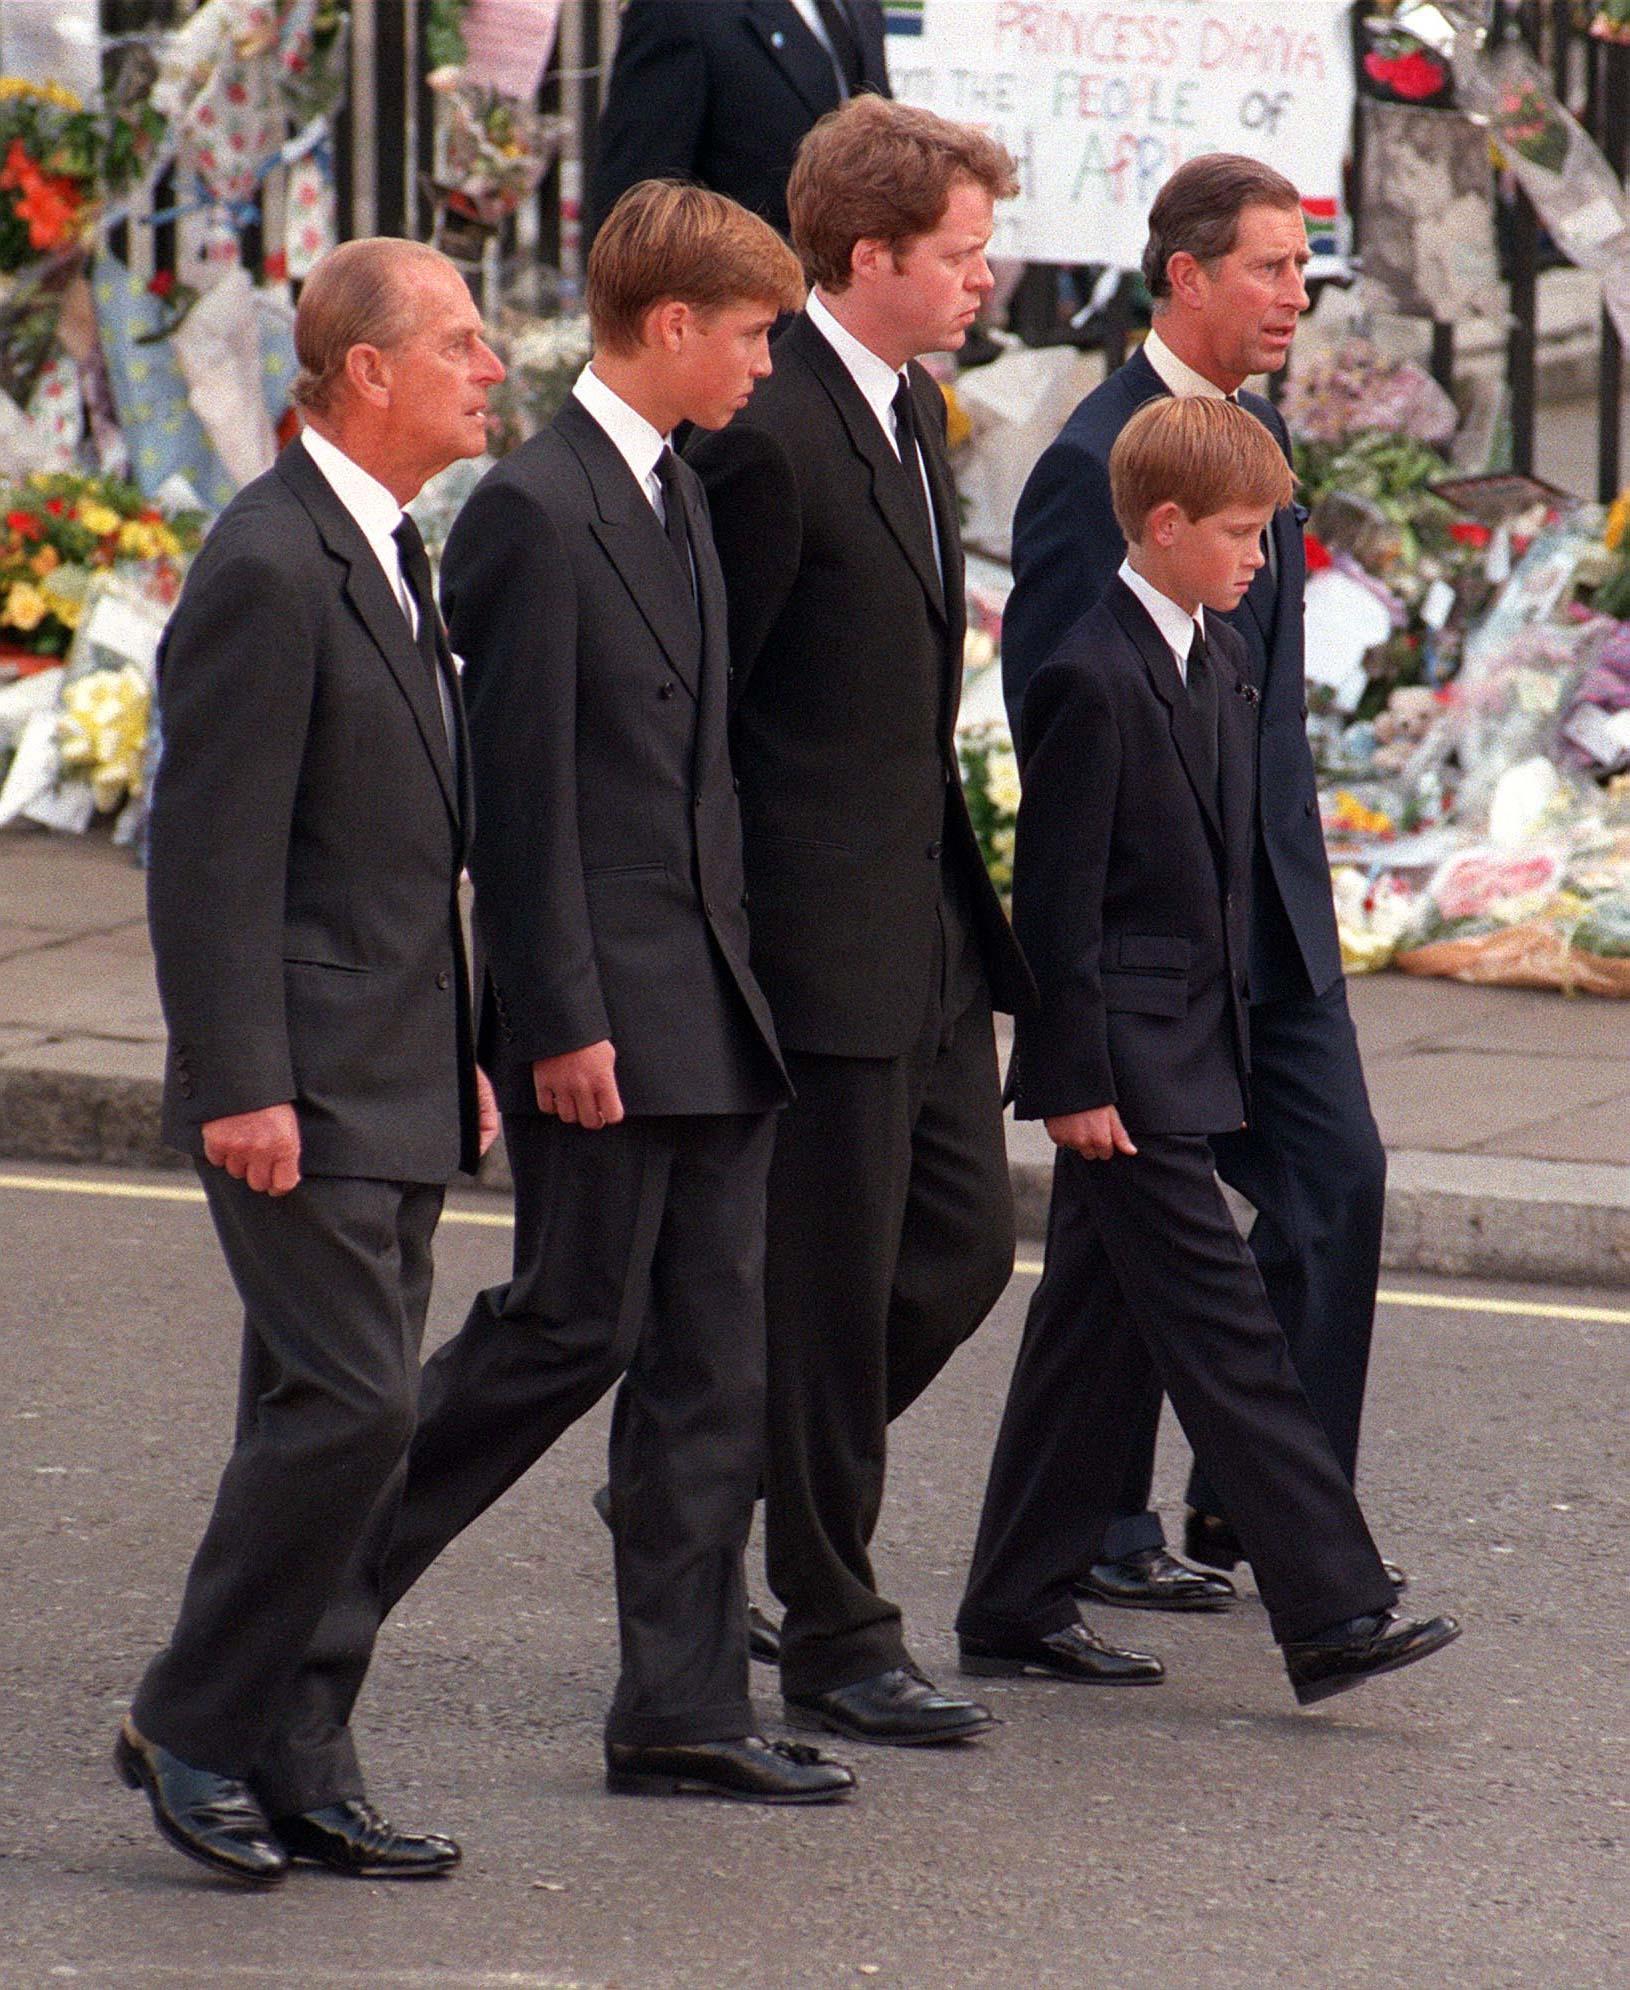 The Duke of Edinburgh, Prince William, Earl Spencer, Prince Harry, and the Prince of Wales following the coffin of Diana, Princess of Wales, to Westminster Abbey for her funeral service [L-R] in September 1997 | Source: Getty Images